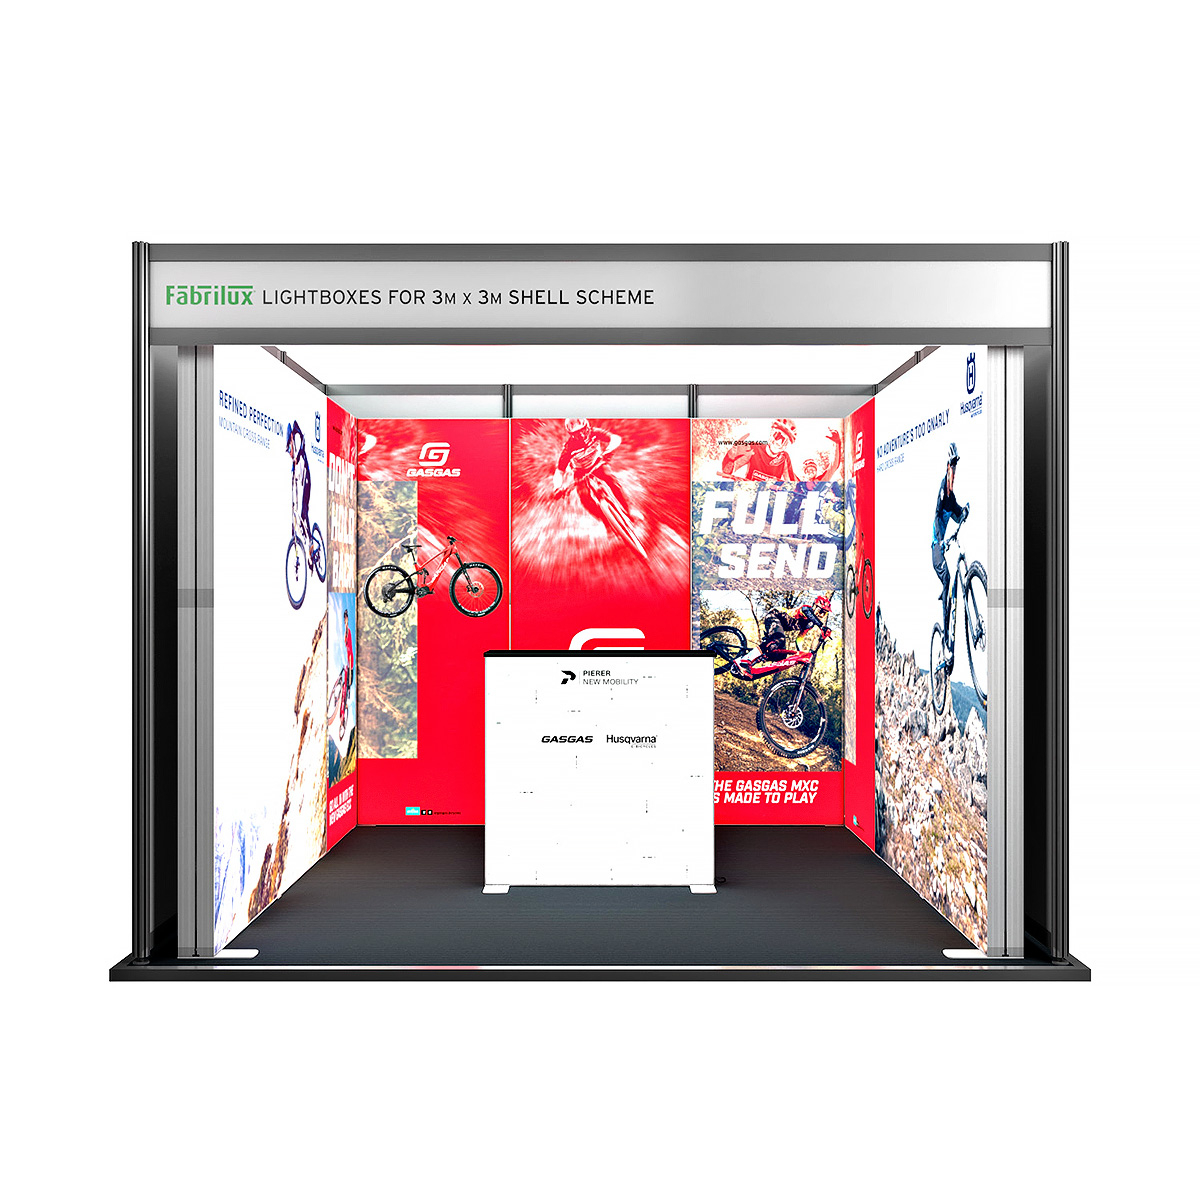 3m x 3m FABRILUX® LED Lightboxes U-Shaped Exhibition Stand Shell Scheme